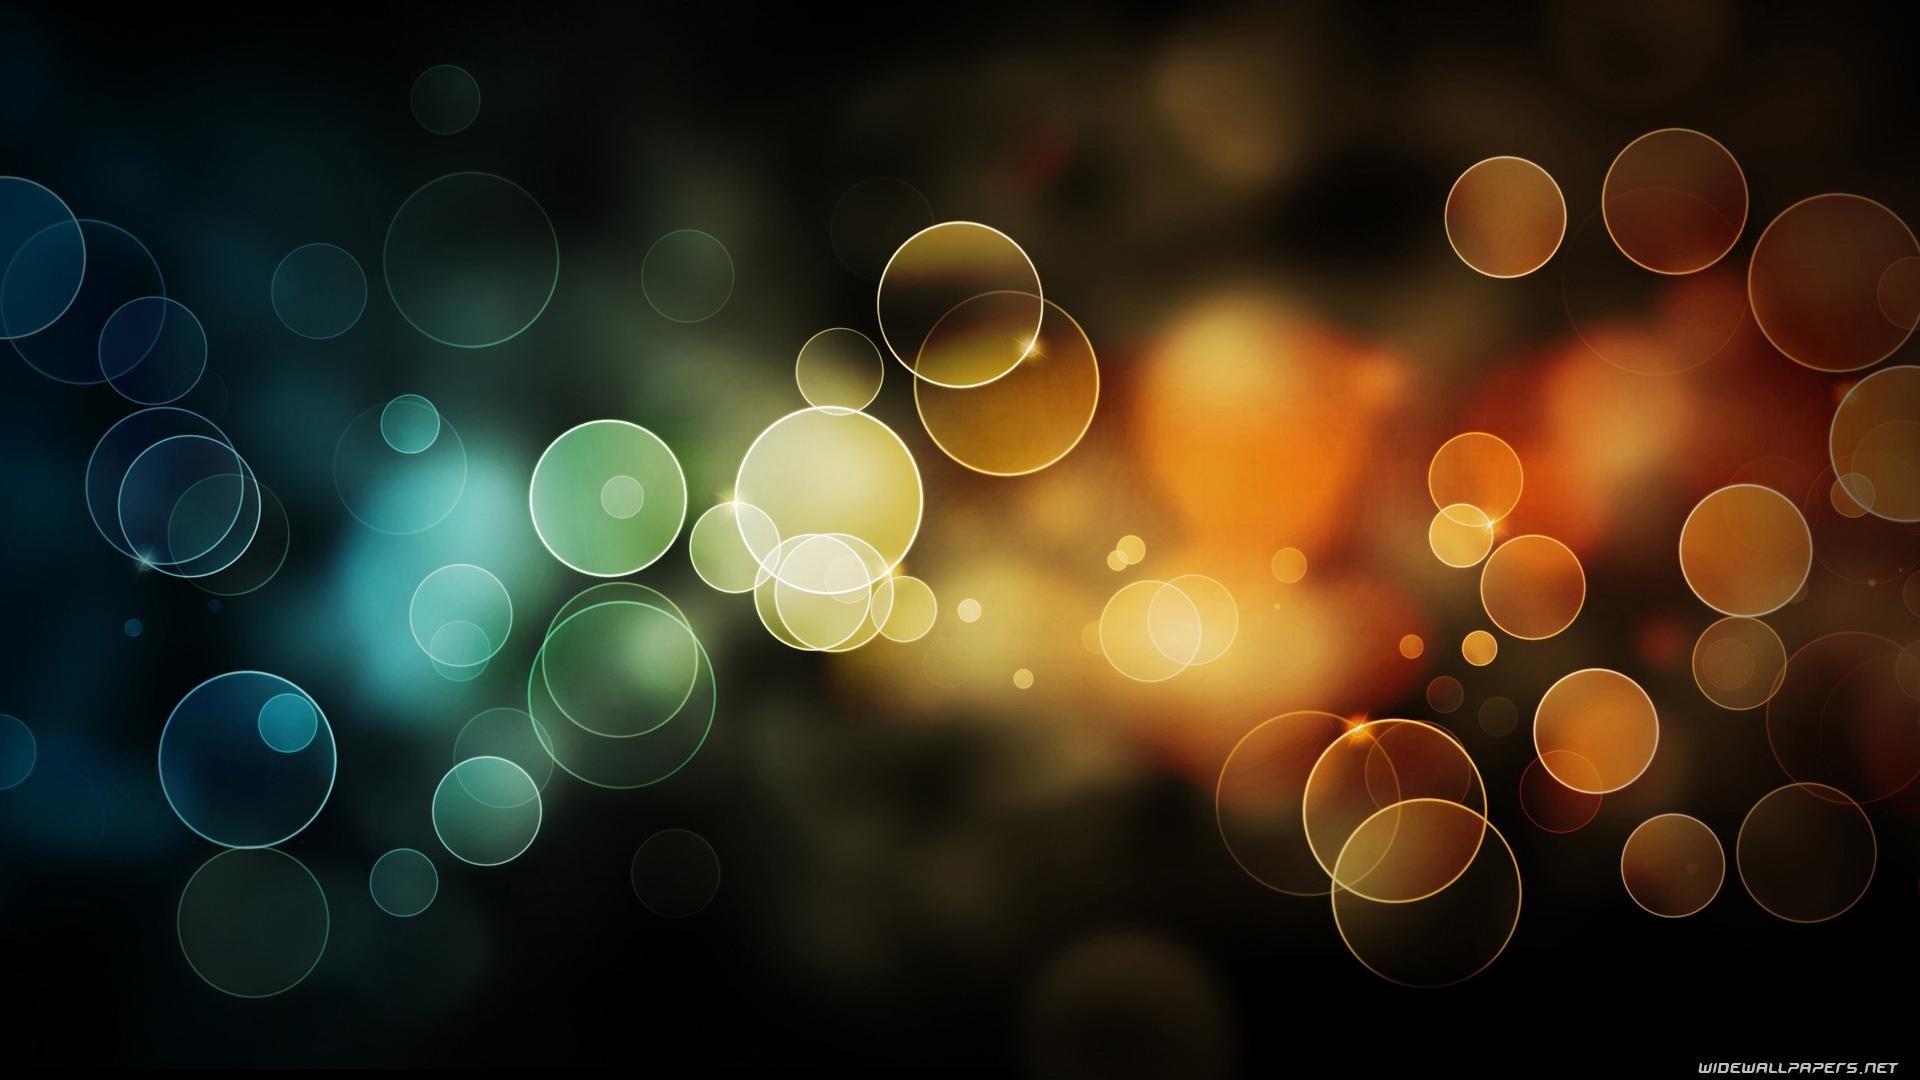 1920x1080 6. abstract-wallpapers6-600x338